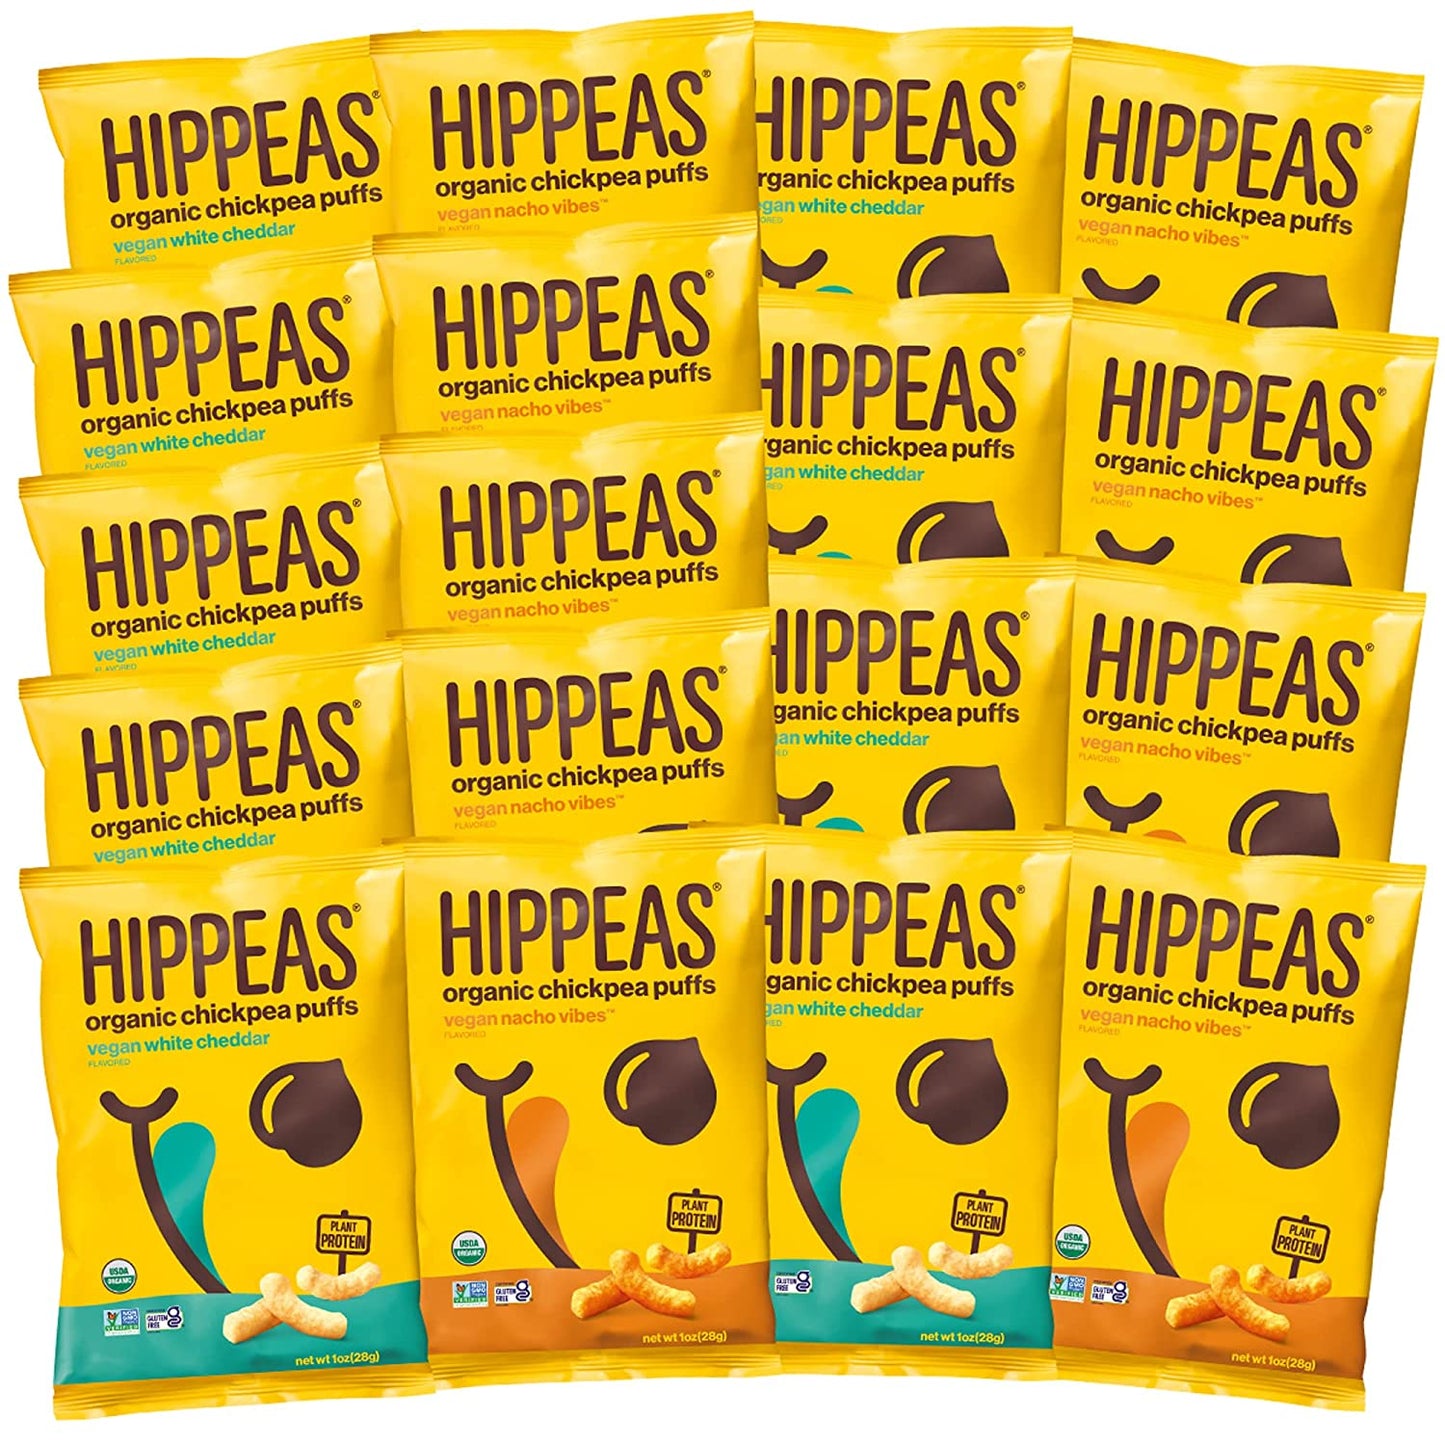 Hippeas Organic Chickpea Puffs, Cheeze Variety Pack: Vegan White Cheddar, Nacho Vibes, 1 Ounce (Pack of 18), 4g Protein, 3g Fiber, Vegan, Gluten-Free, Crunchy, Plant Protein Snacks